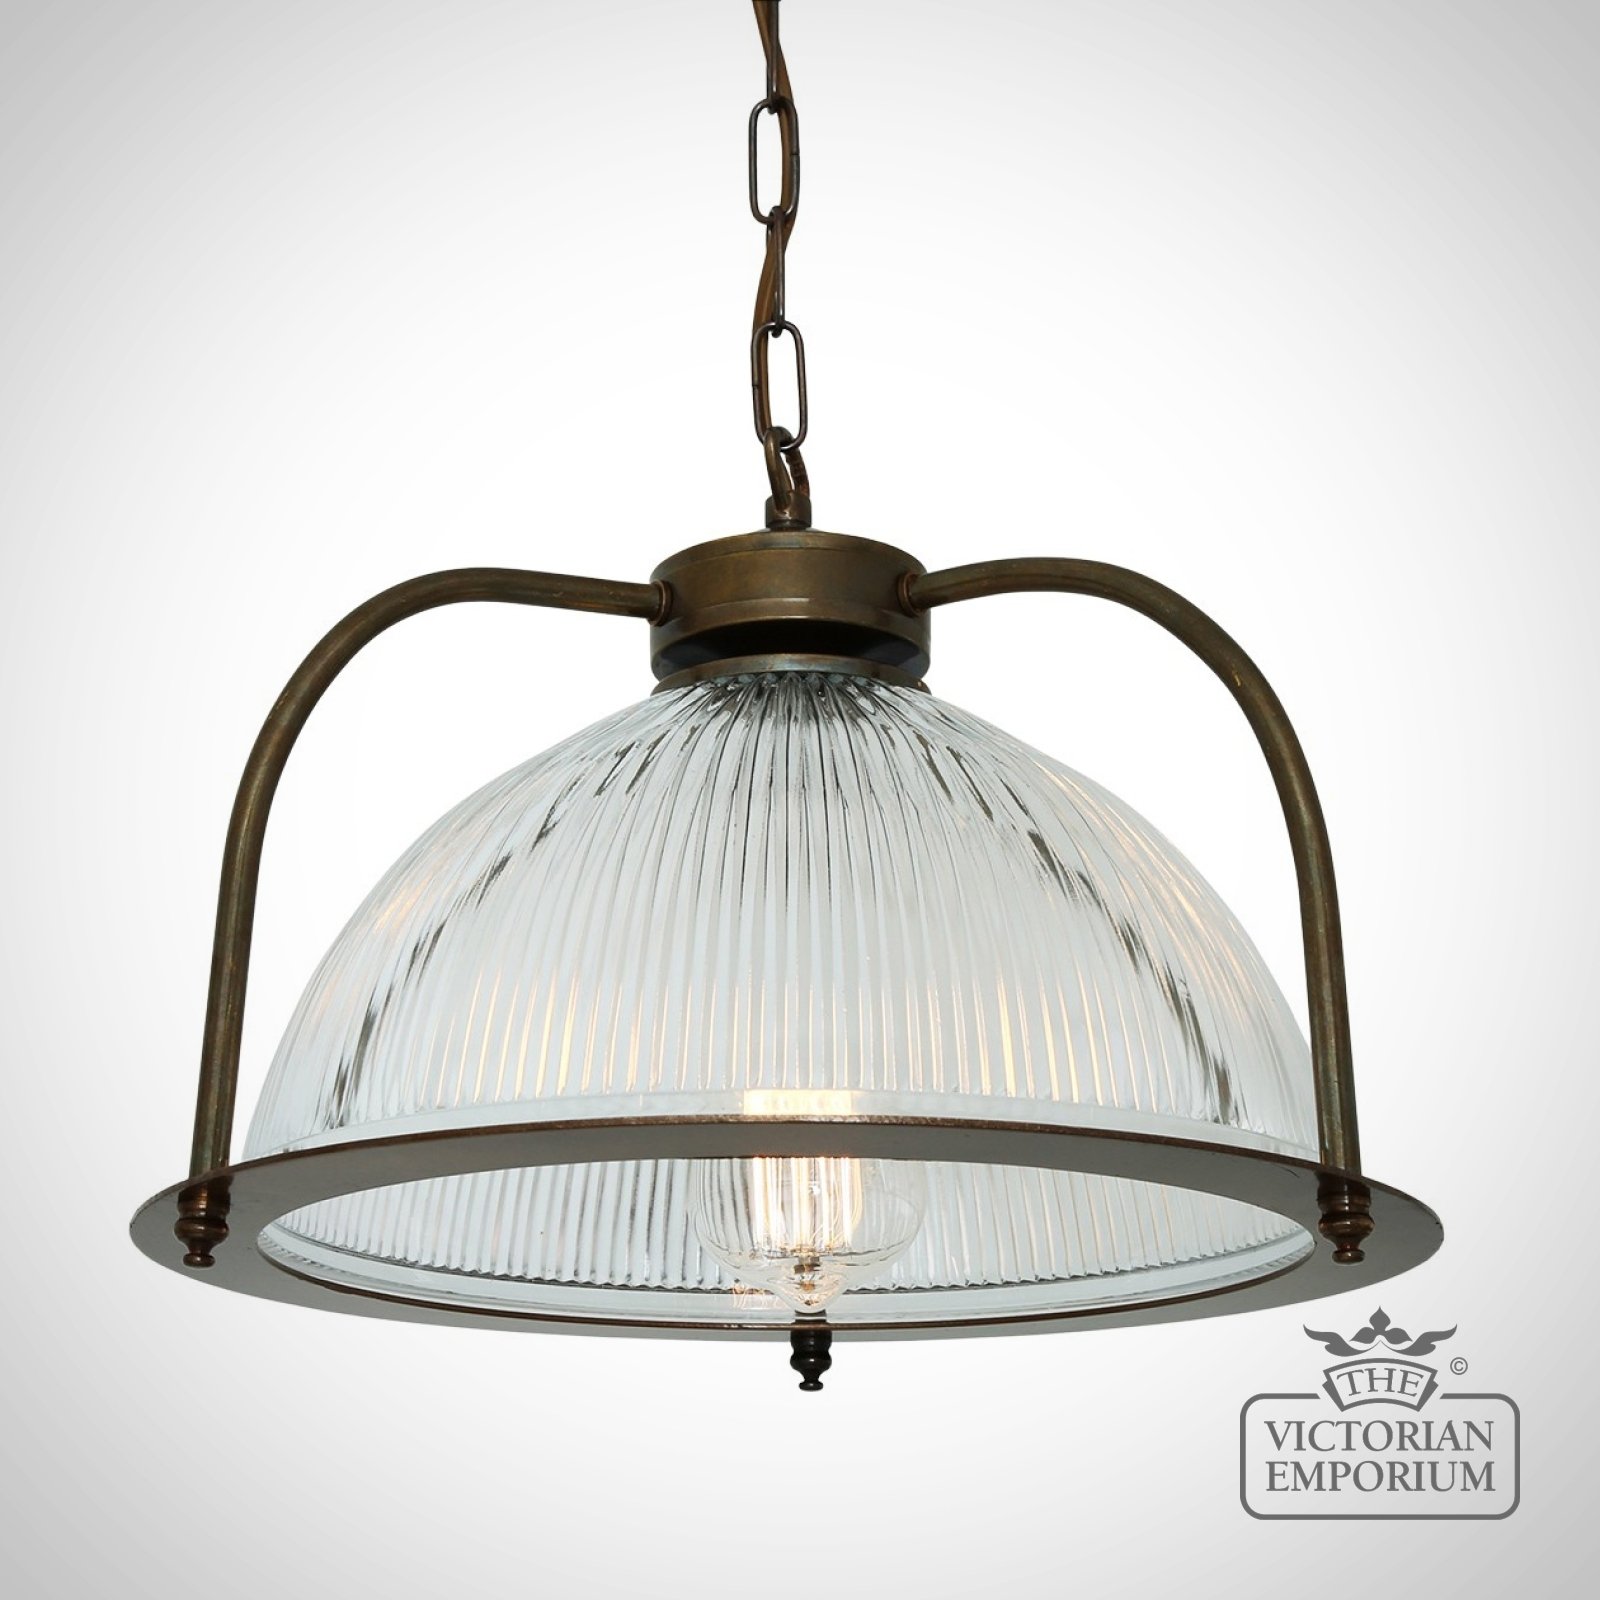 Bousta Holophane Pendant Light - with or without diffuser